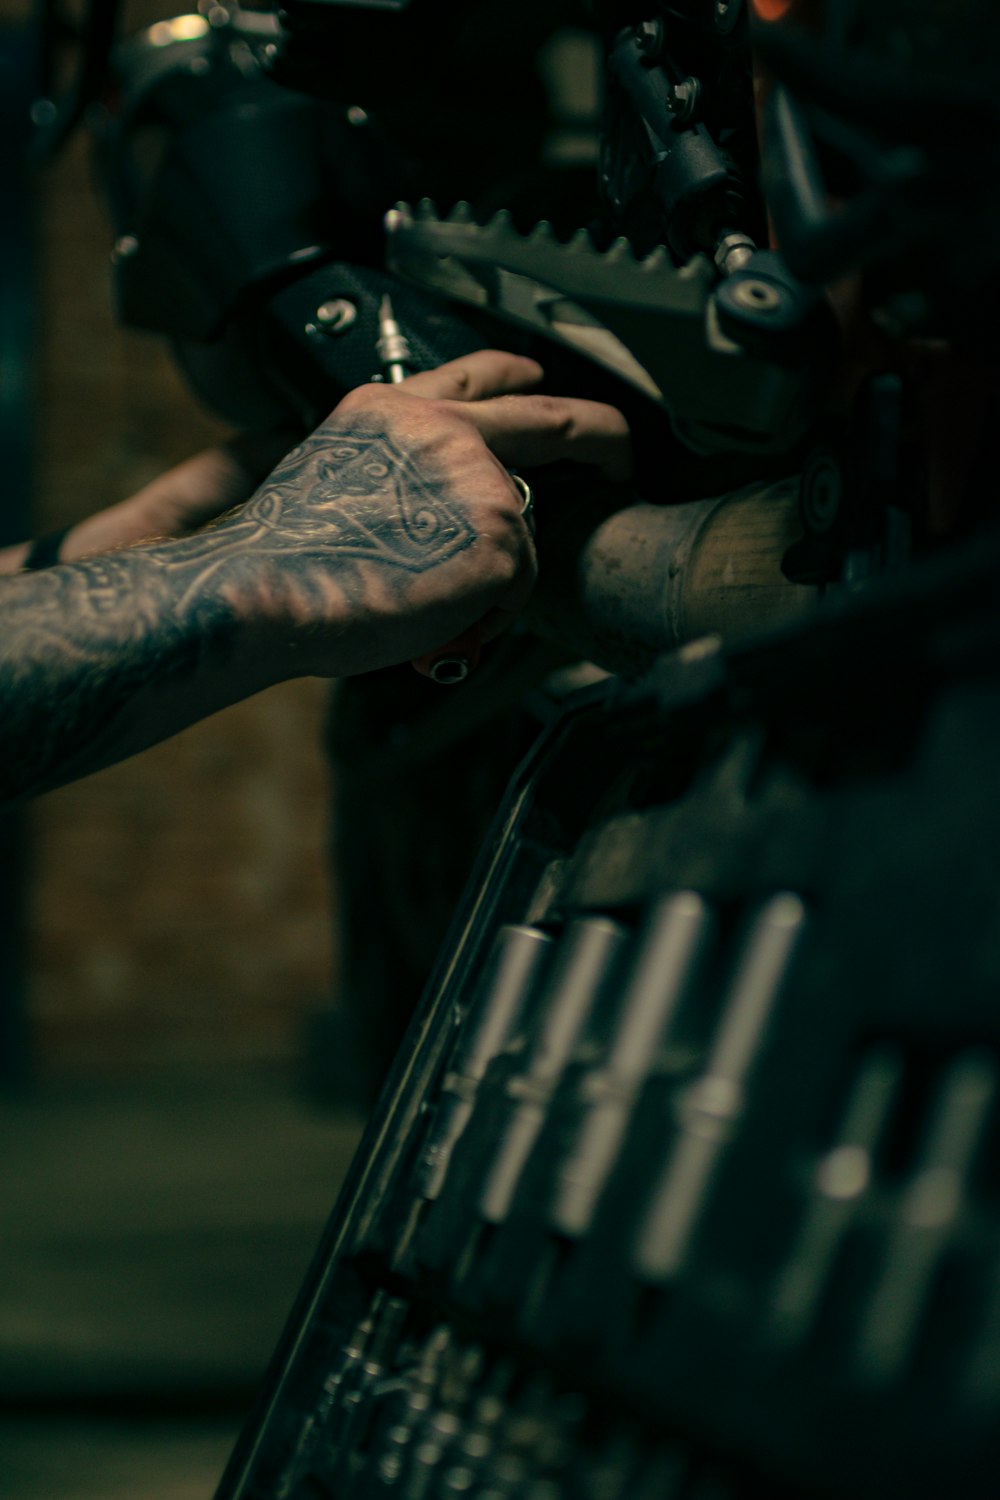 a man with a tattoo on his arm working on a motorcycle